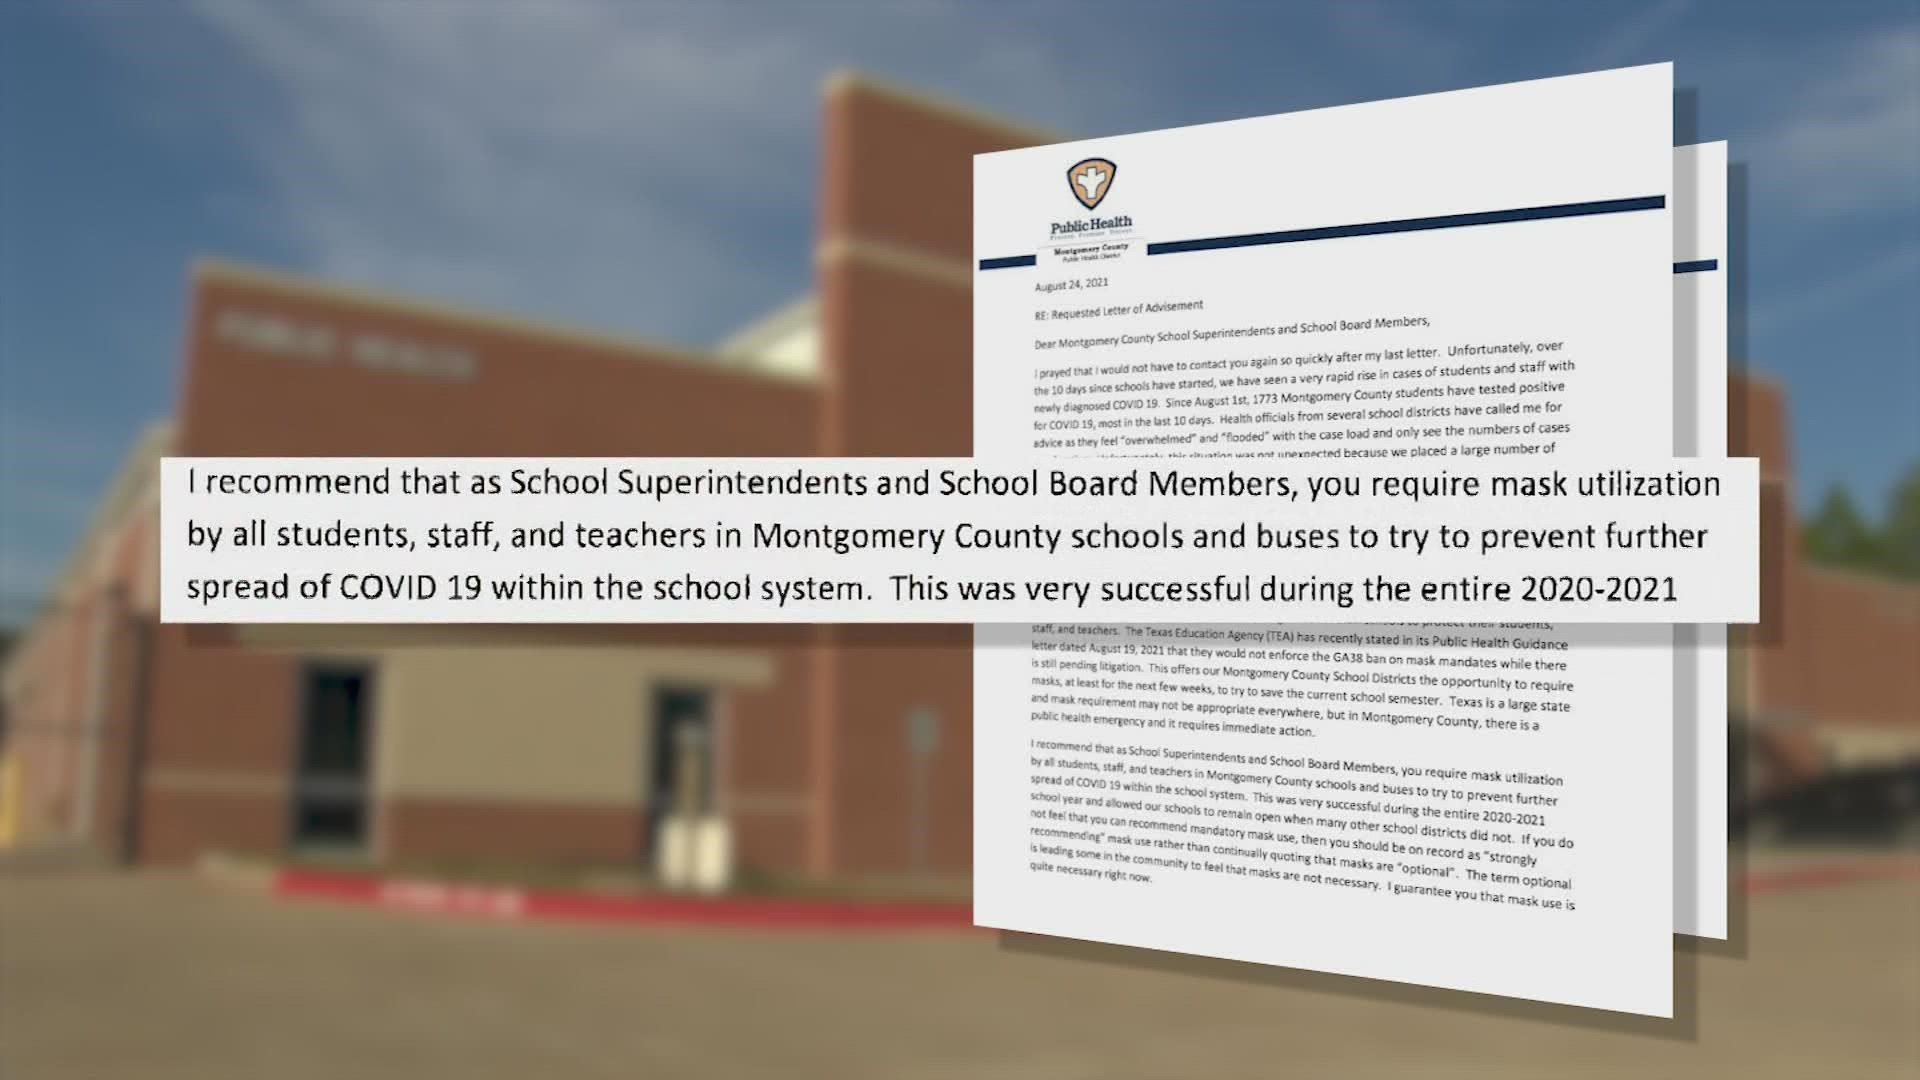 Despite the Aug. 24 letter from Dr. Charles Sims and high COVID-19 case counts, area school districts in Montgomery County have not instituted mask mandates.